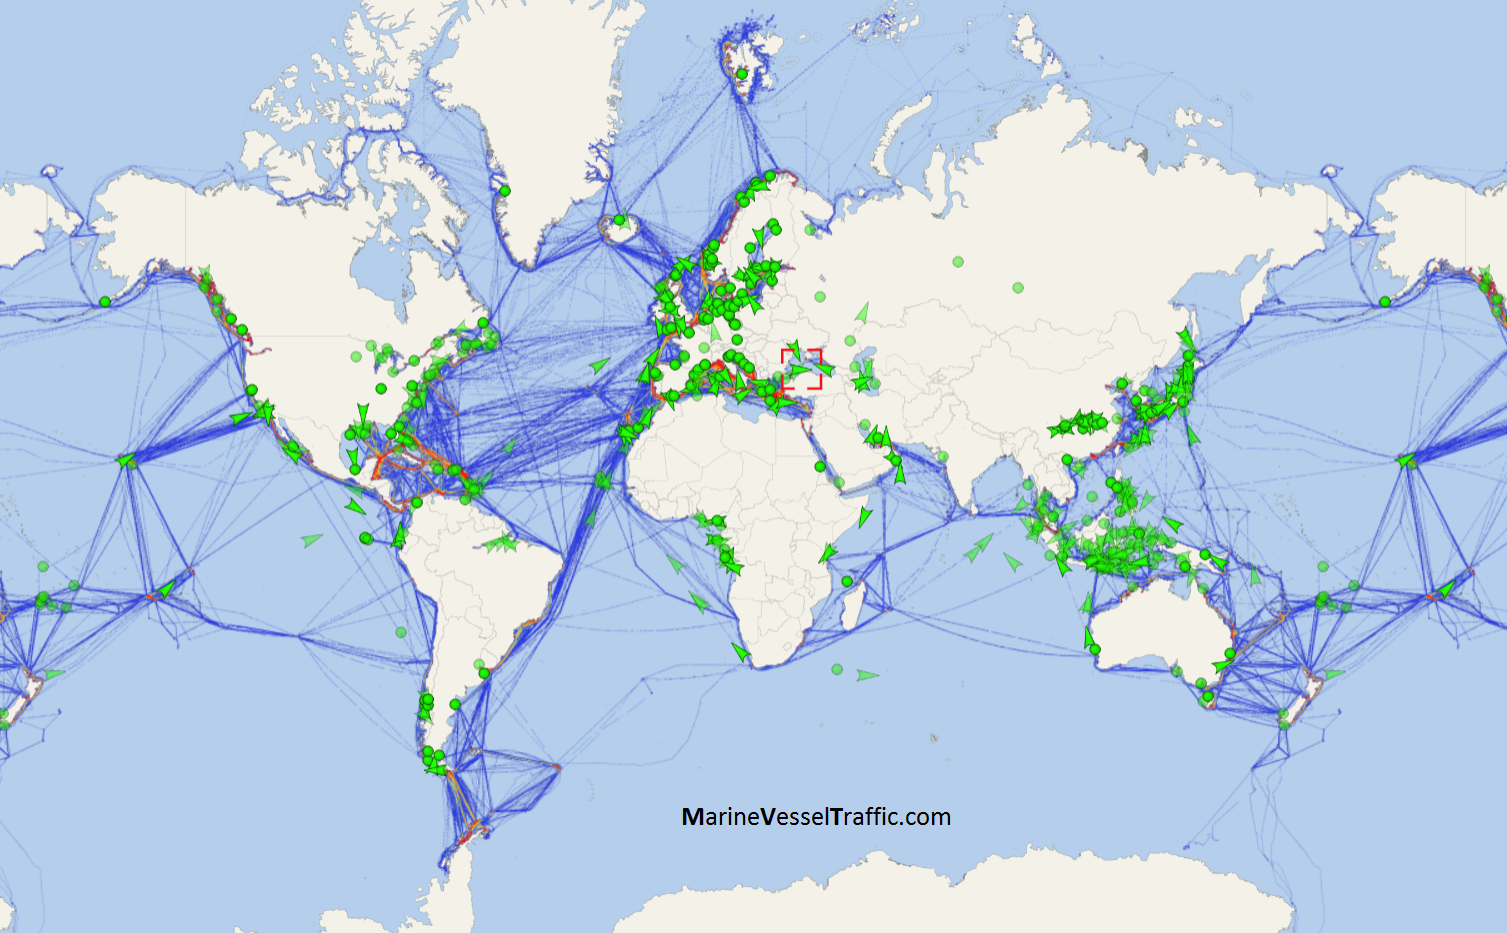 WORLD MAP OF CRUISE SHIPS TRAVEL ROUTES